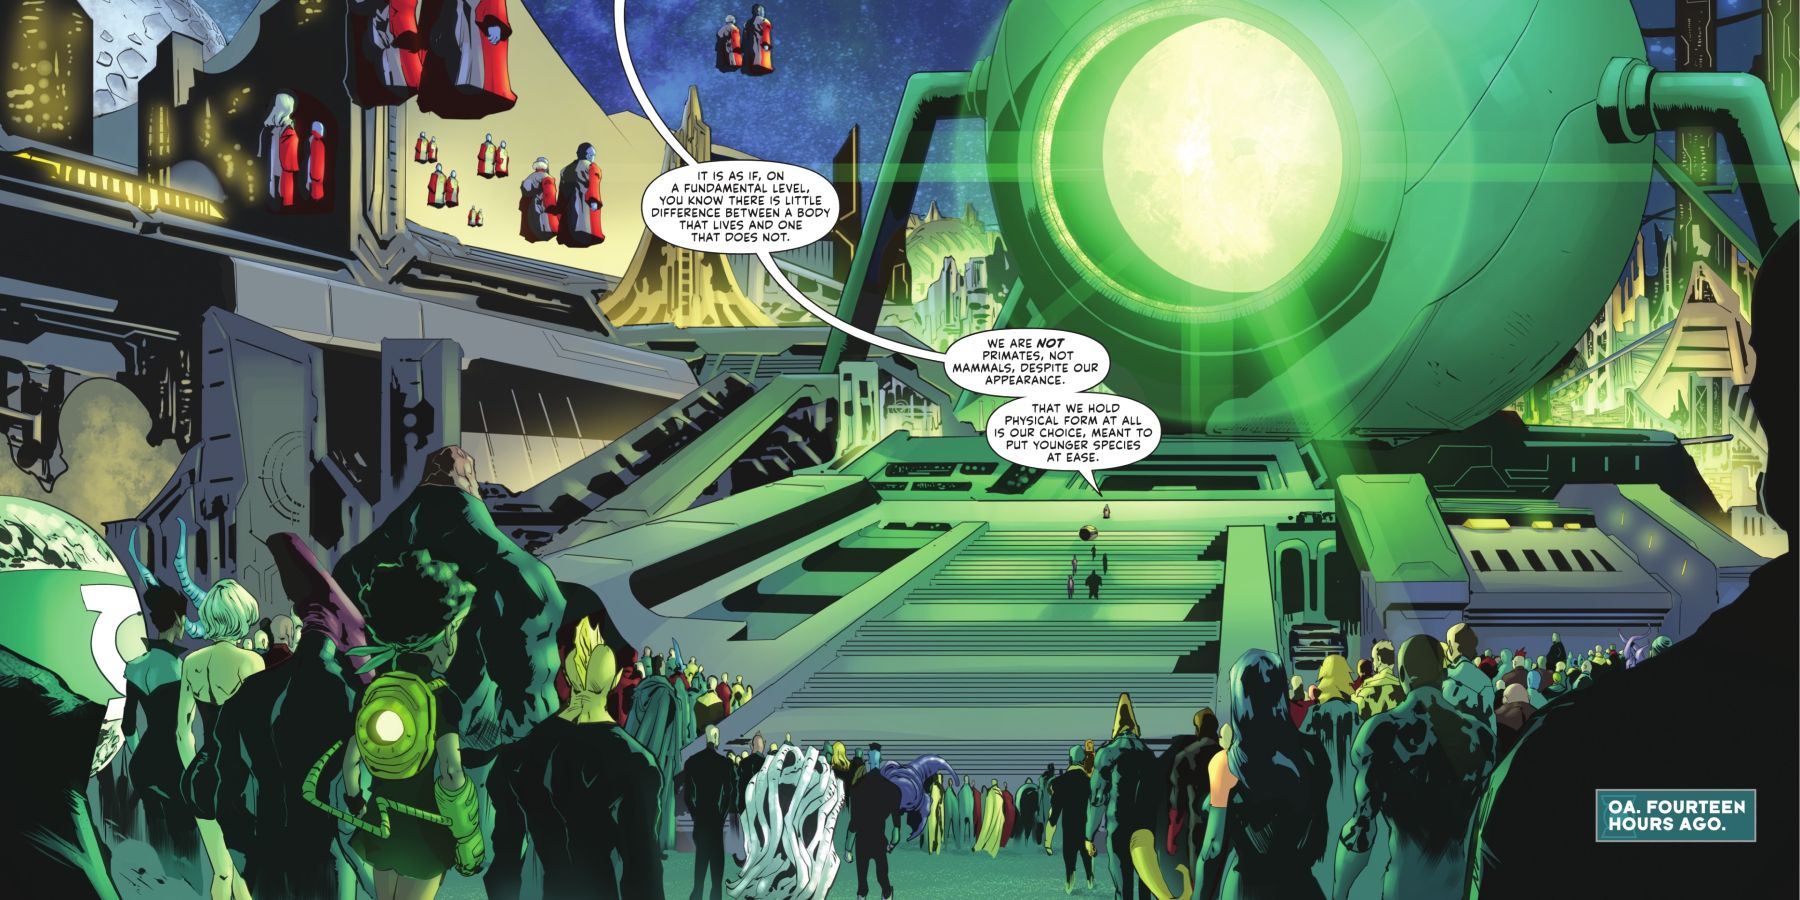 The Green Lantern Corps assembled on Oa